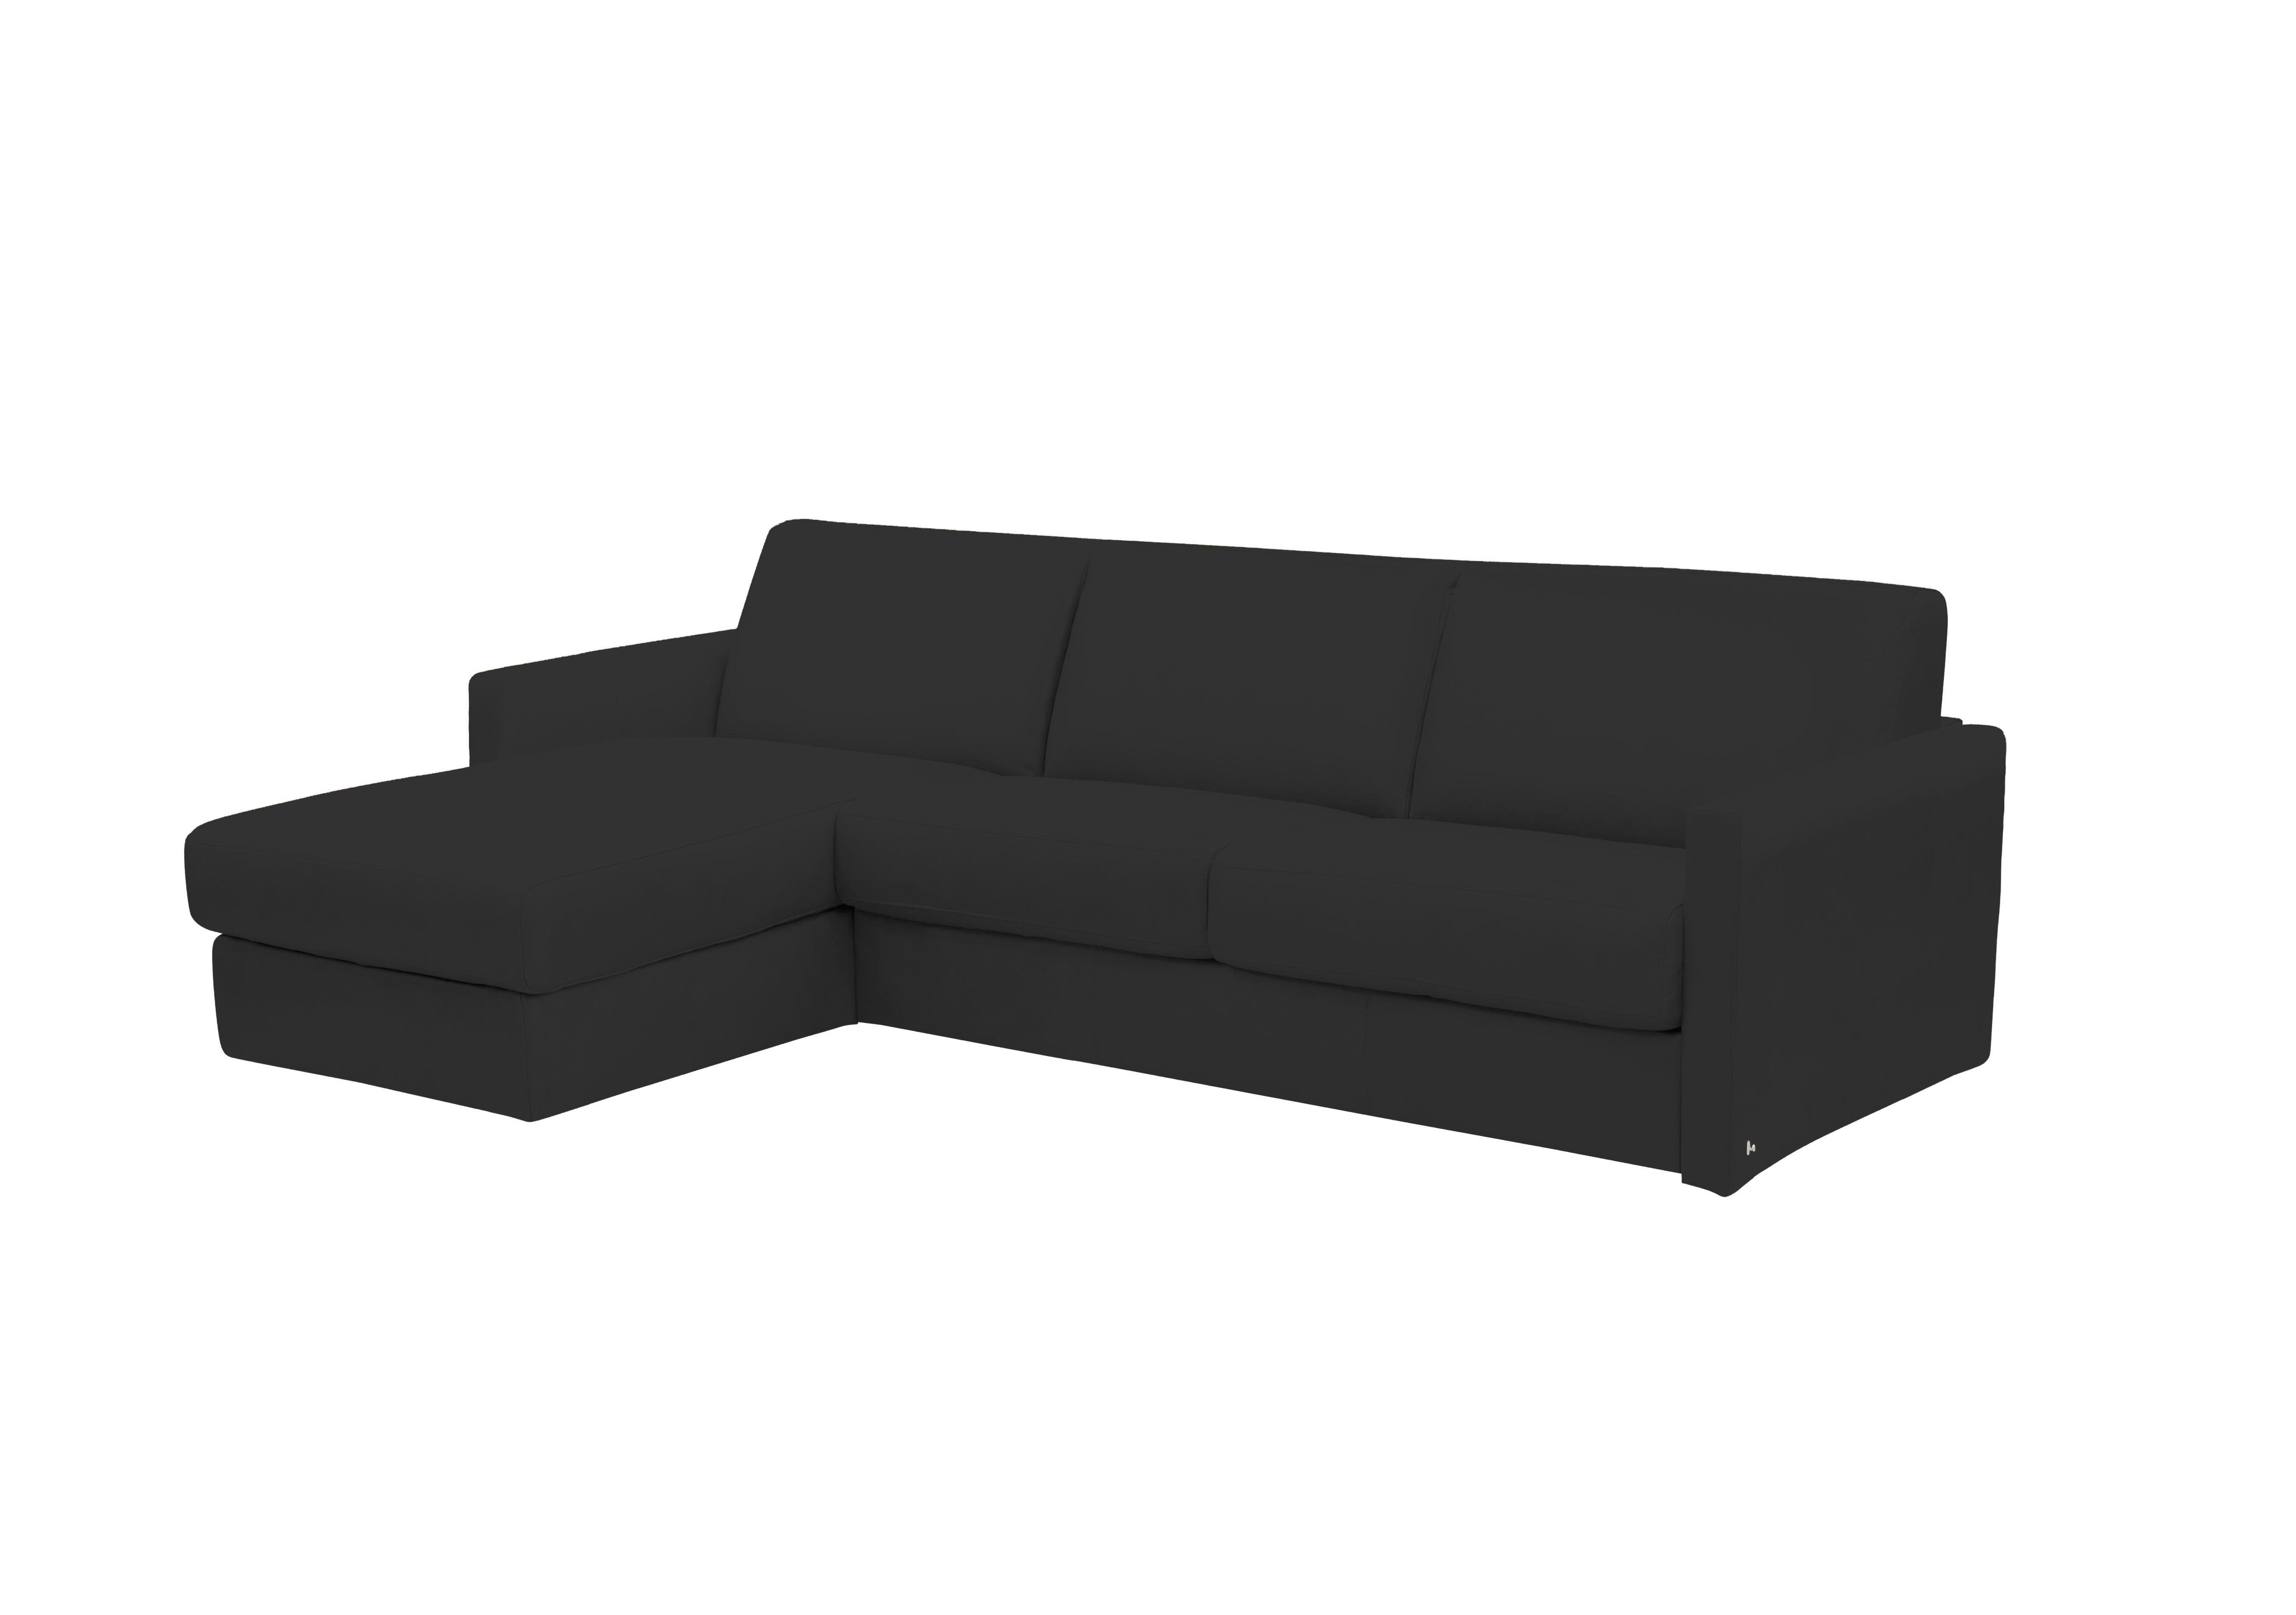 Alcova 3 Seater Leather Sofa Bed with Storage Chaise and Slim Arms in Torello Nero 71 on Furniture Village